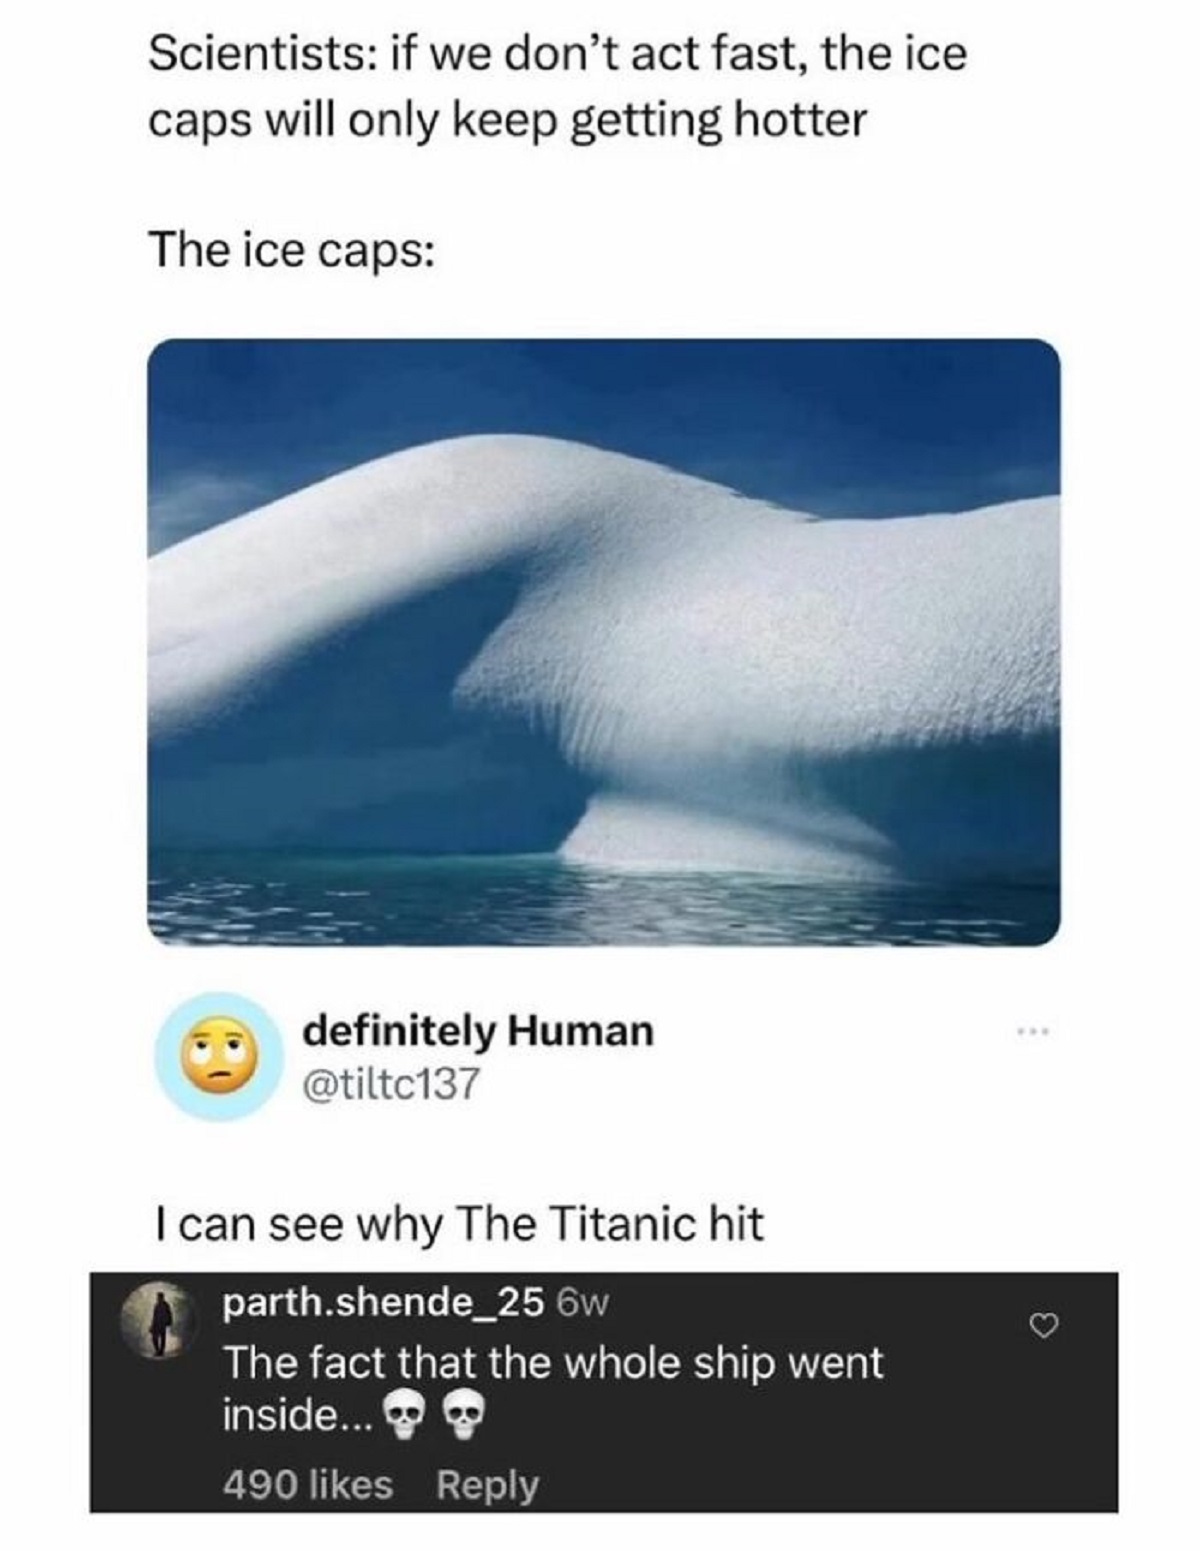 wave - Scientists if we don't act fast, the ice caps will only keep getting hotter The ice caps definitely Human I can see why The Titanic hit parth.shende_25 6w The fact that the whole ship went inside... 490 >>